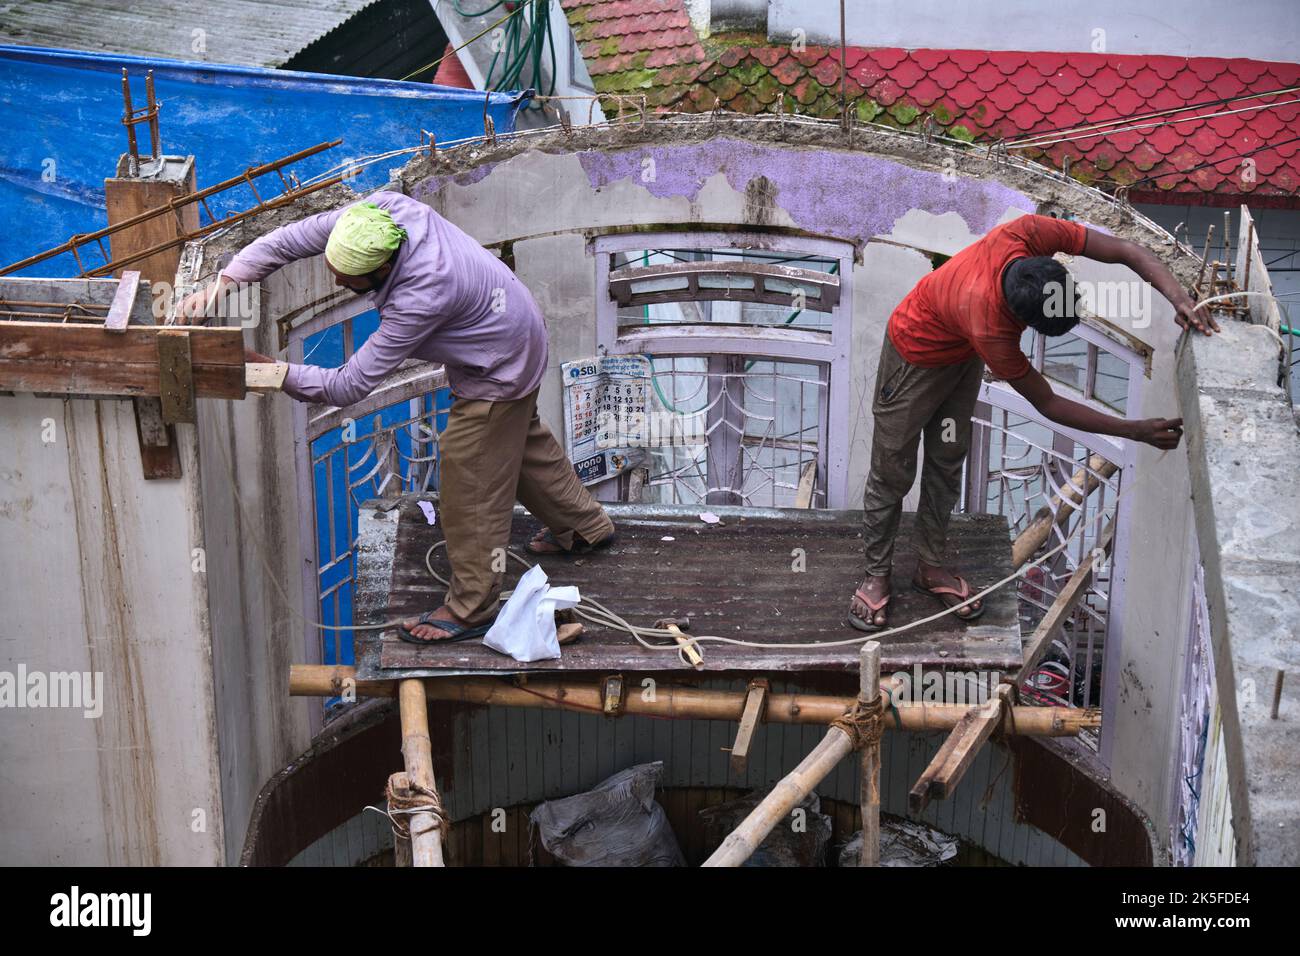 22 June 2022, Darjeeling, India, undefined construction worker constructing or building wall by placing bricks and cement in darjeeling, India - conce Stock Photo